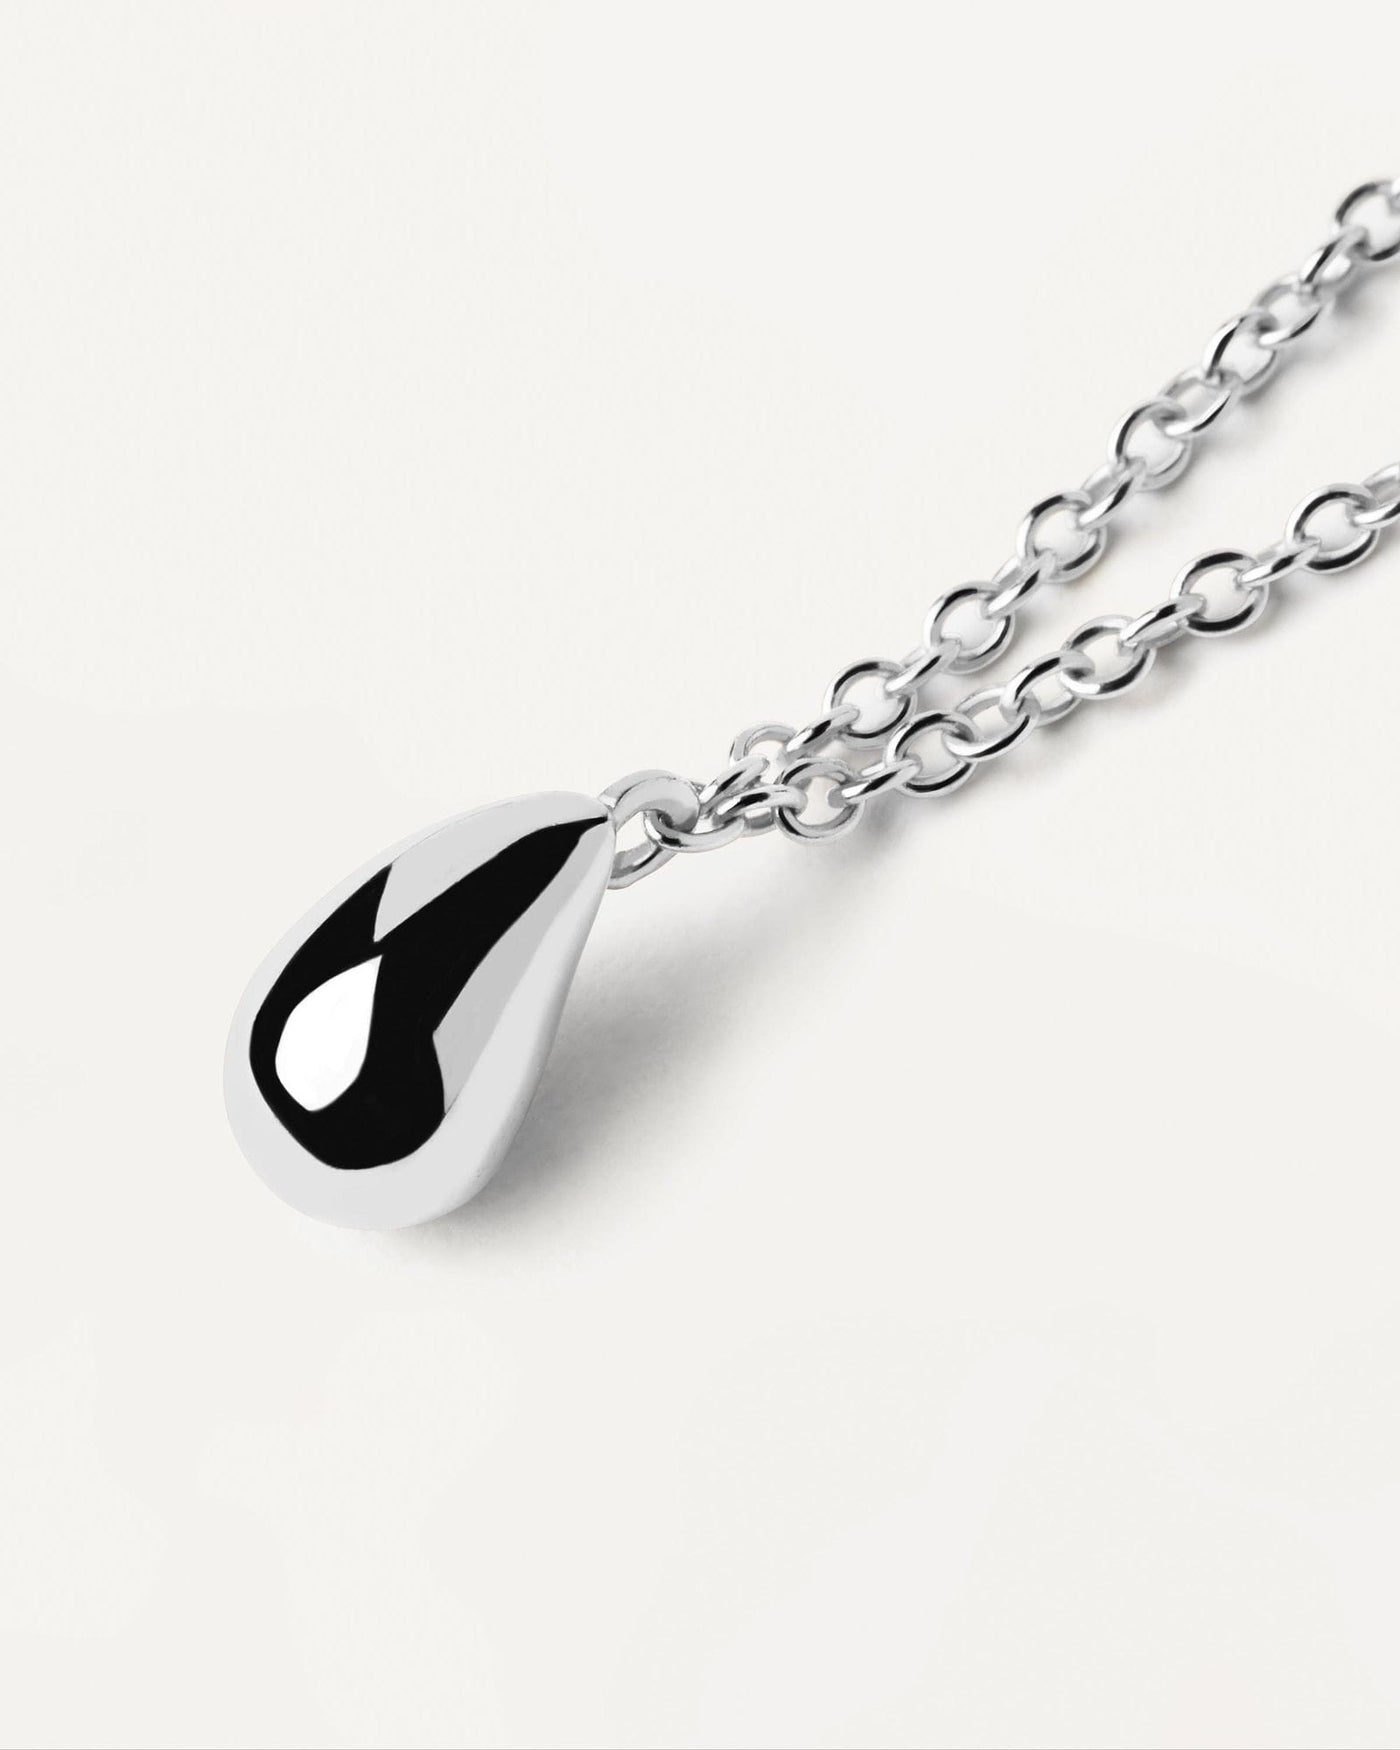 2024 Selection | Drop Silver Necklace. Sterling silver necklace with drop shape pendant. Get the latest arrival from PDPAOLA. Place your order safely and get this Best Seller. Free Shipping.